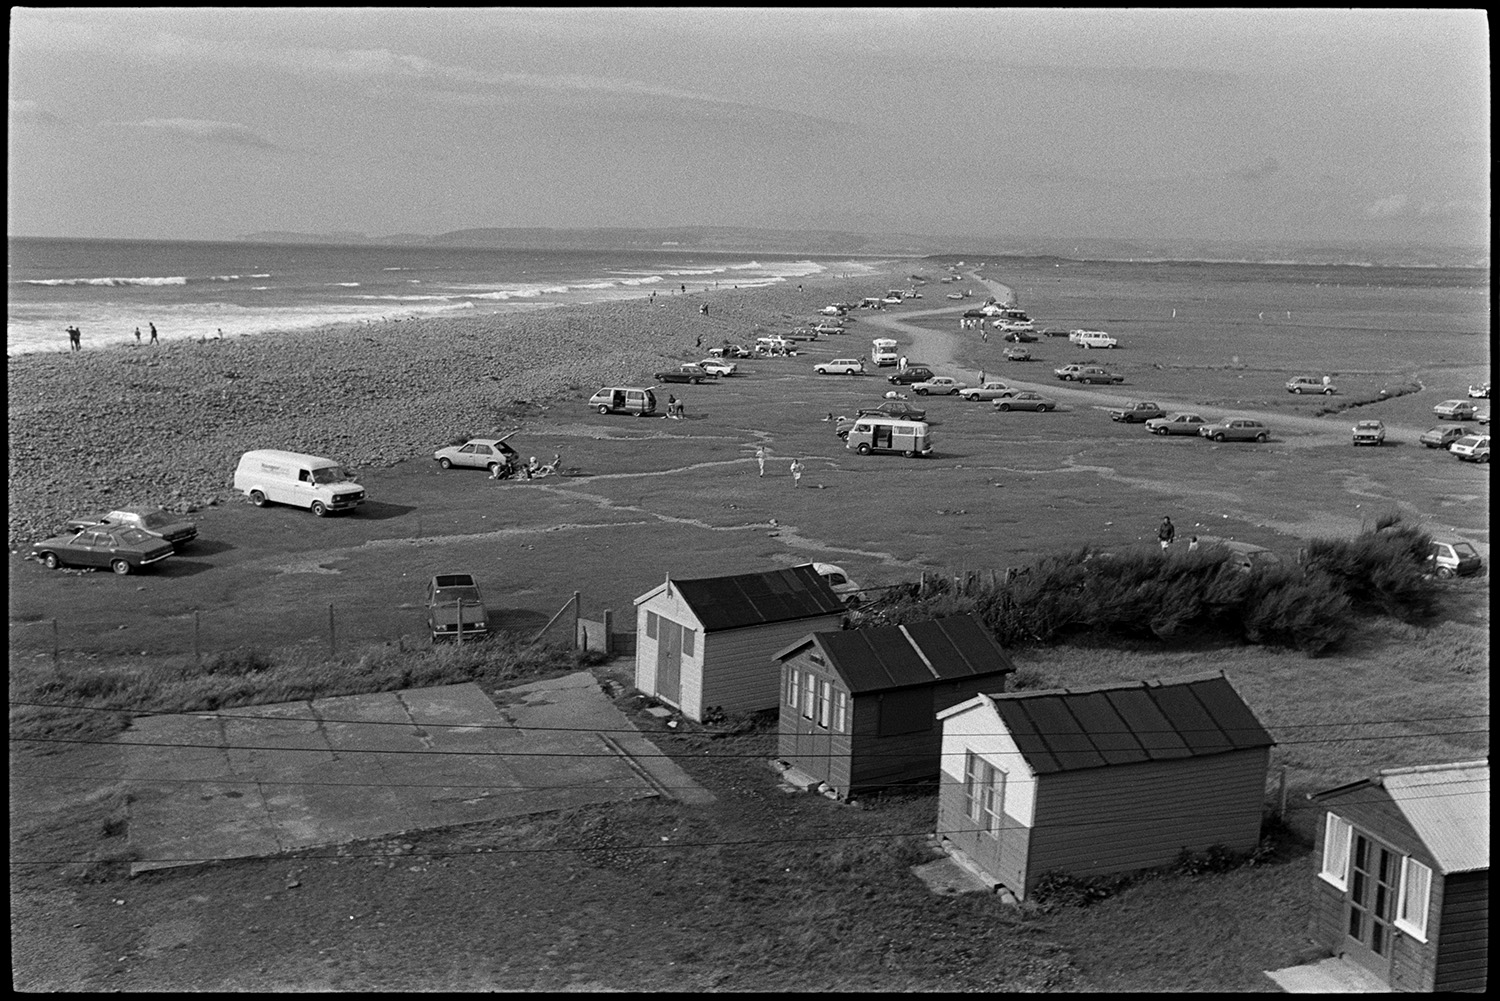 Seaside amusements, children. 
[Cars parked behind the pebble ridge at Westward Ho! beach. People are walking along the beach and beach huts can be seen in the foreground.]